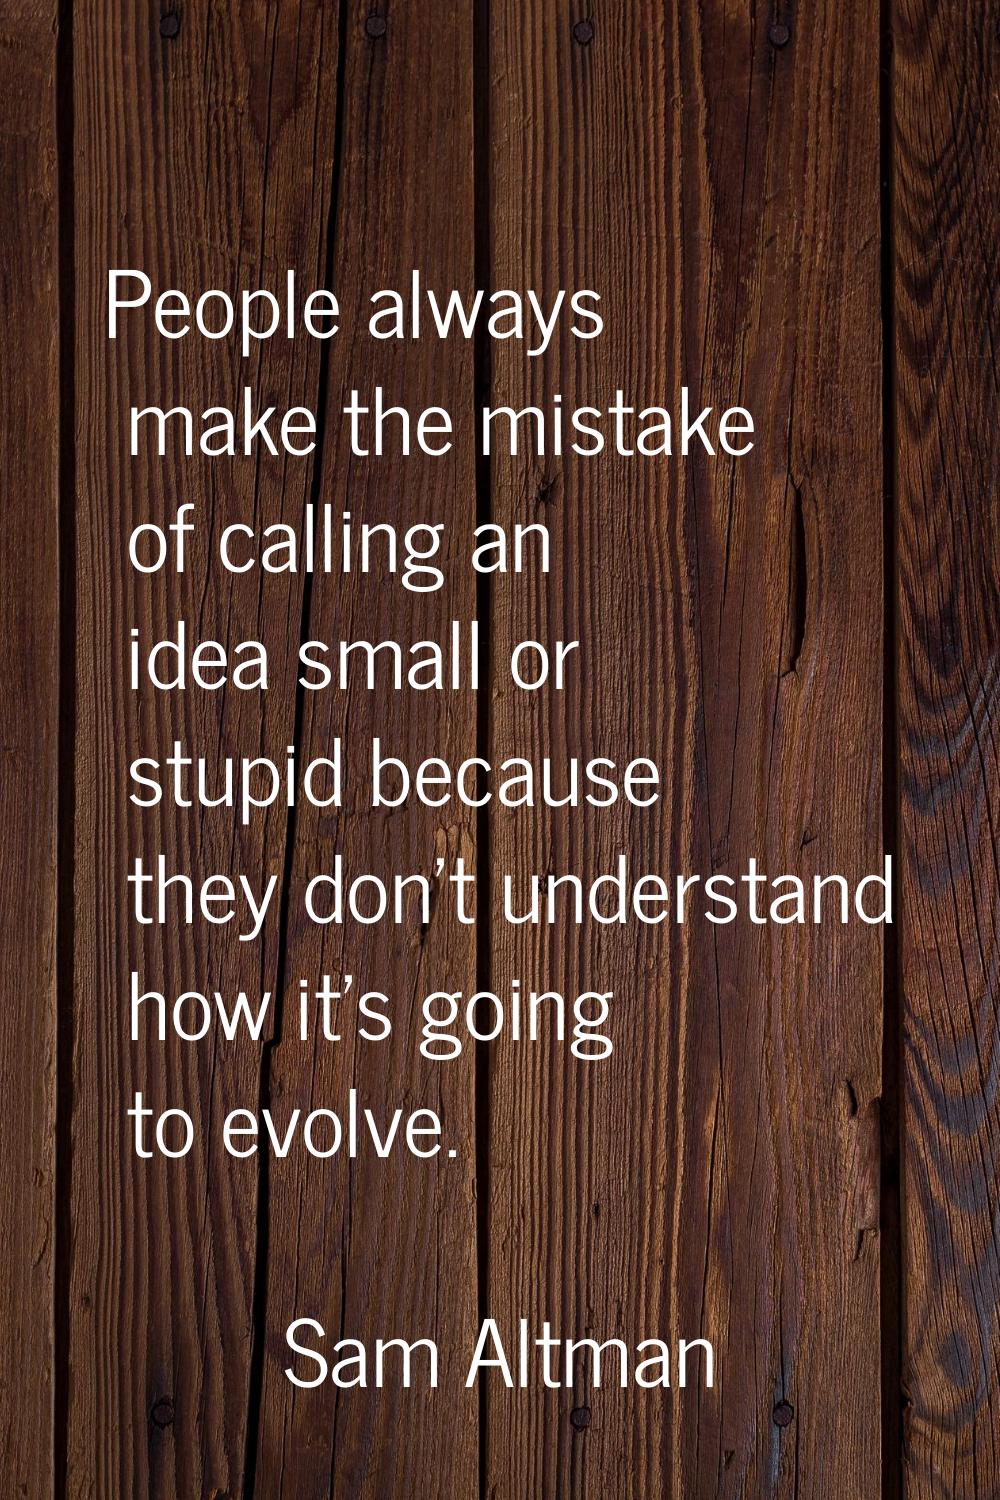 People always make the mistake of calling an idea small or stupid because they don't understand how